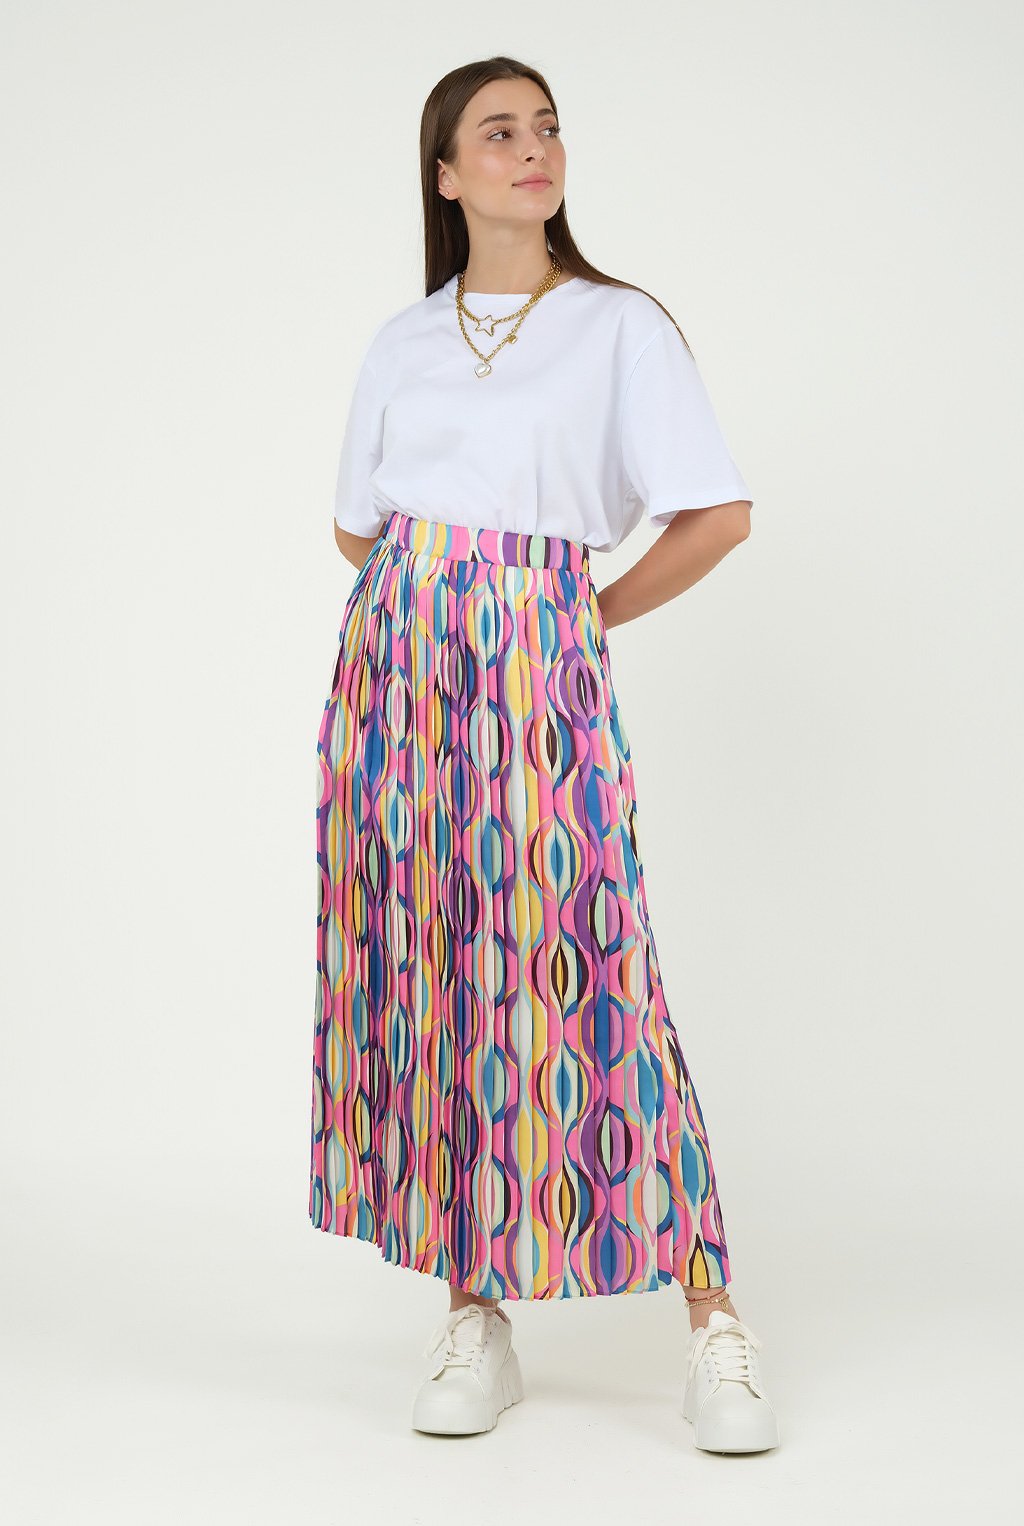 Onion Patterned Pleated Skirt Pink 